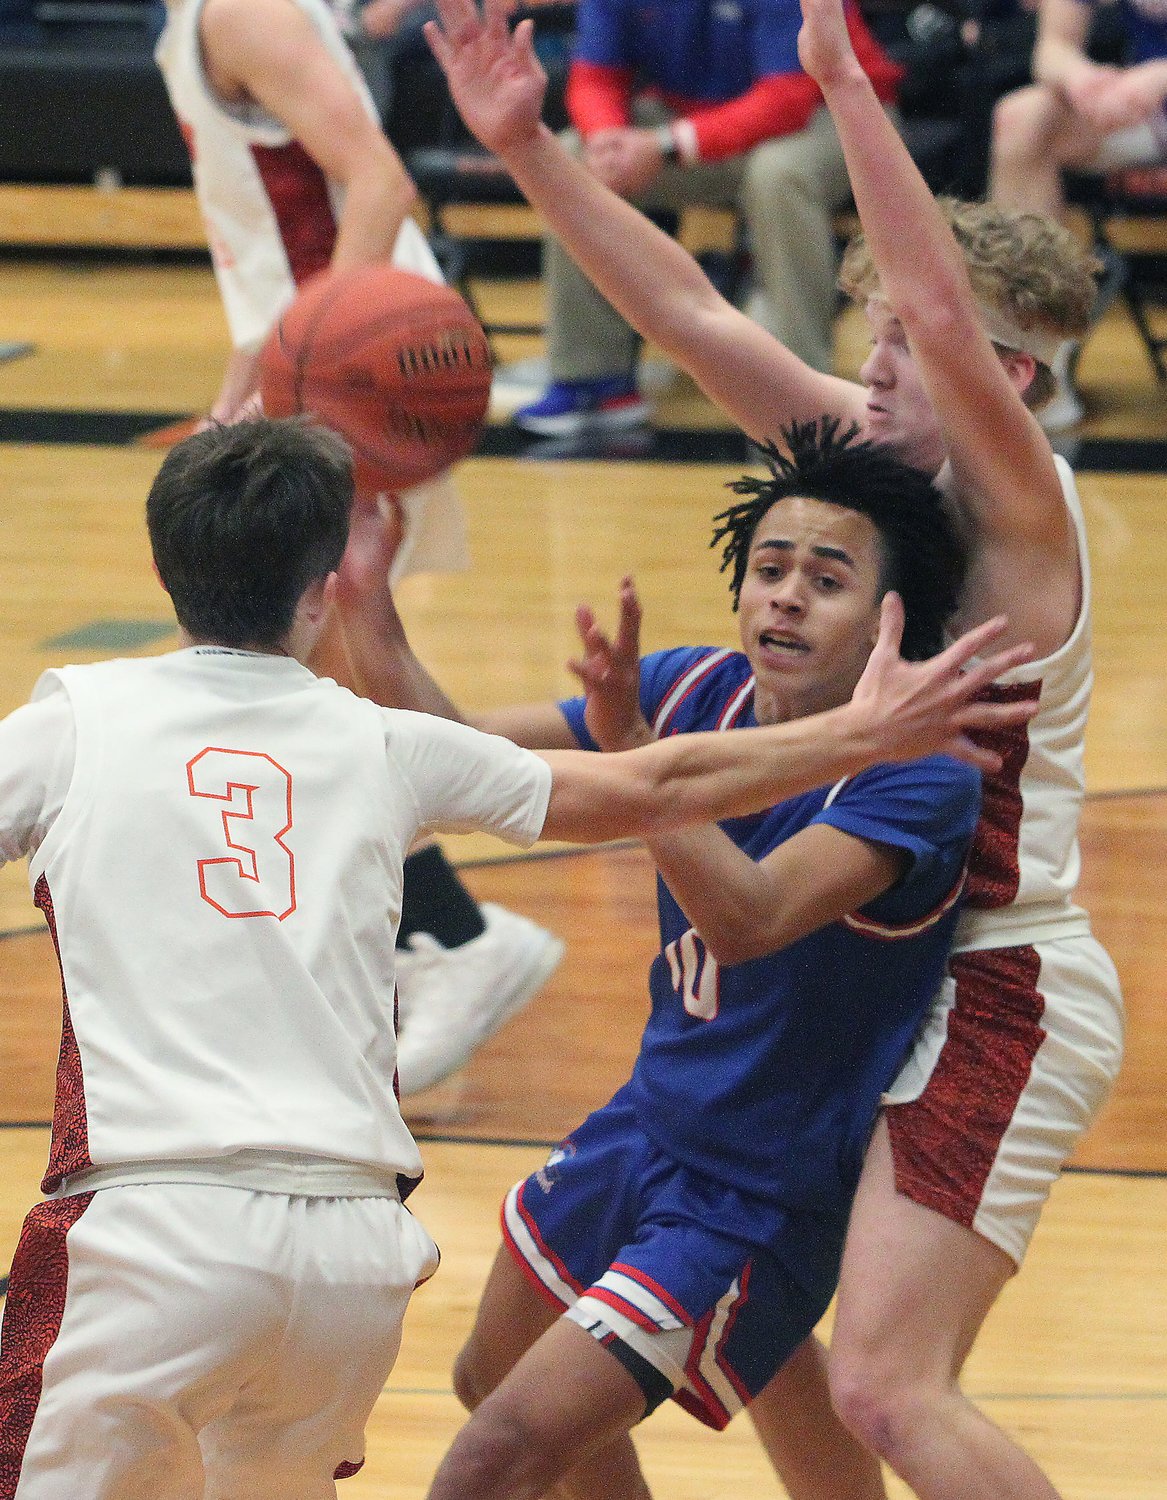 aisten Payne (#10), a Moberly junior point guard, looks to pass the ball to an open teammate Saturday as he is defended by Kirksville's Lane Keeney and Isaac Danielson (#3) during the boys championship game of the Macon Tournament. Payne netted a game-high 24 points in the Moberly loss.